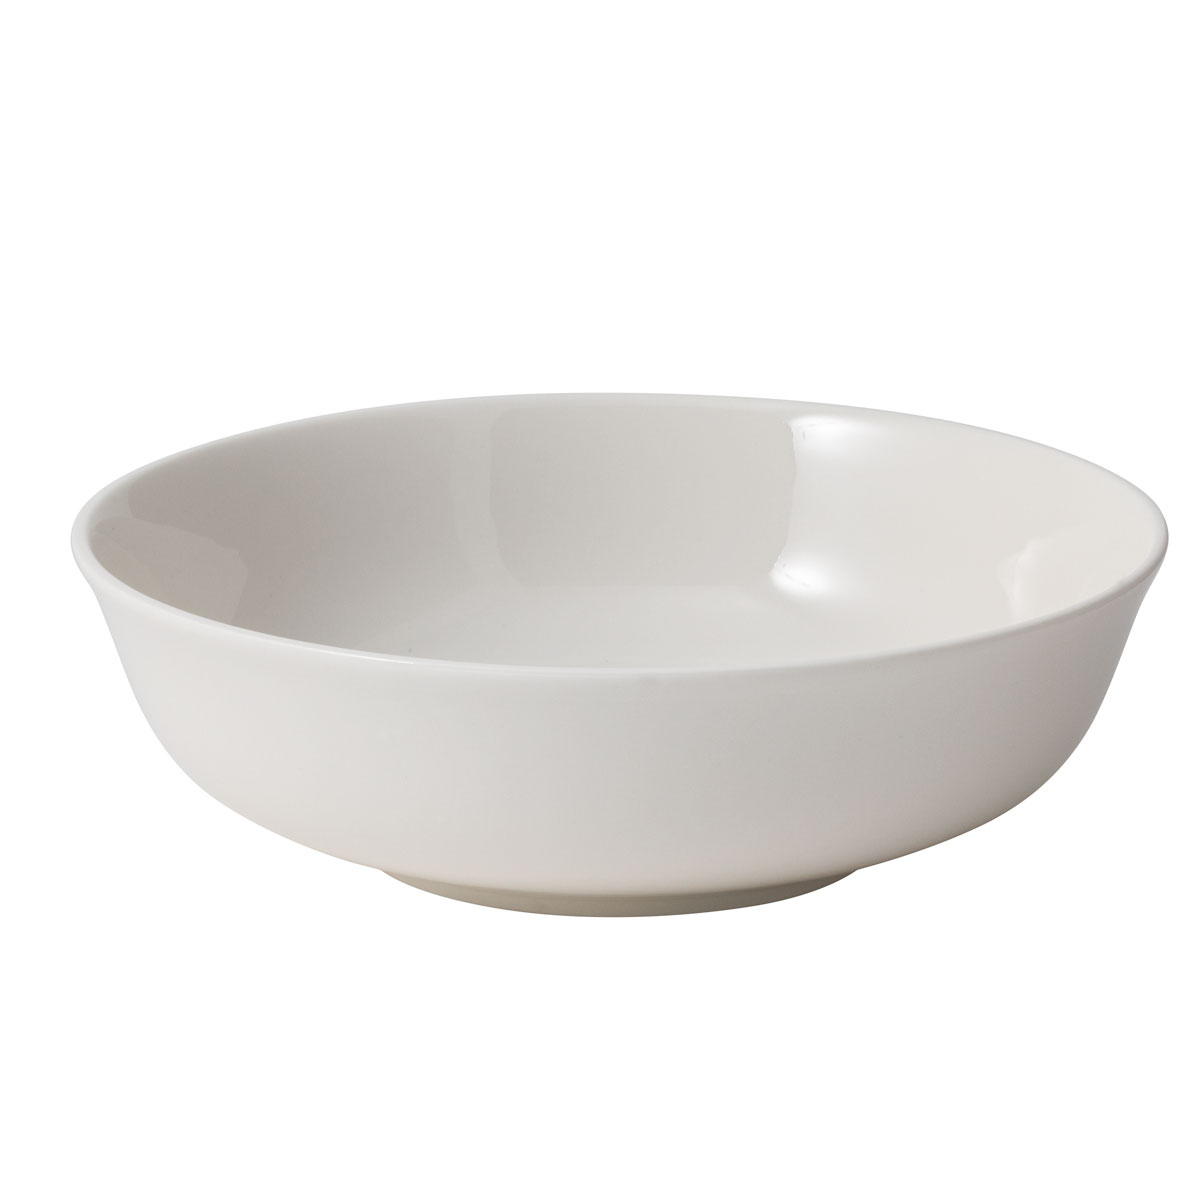 Villeroy and Boch For Me All Purpose Bowl, Single